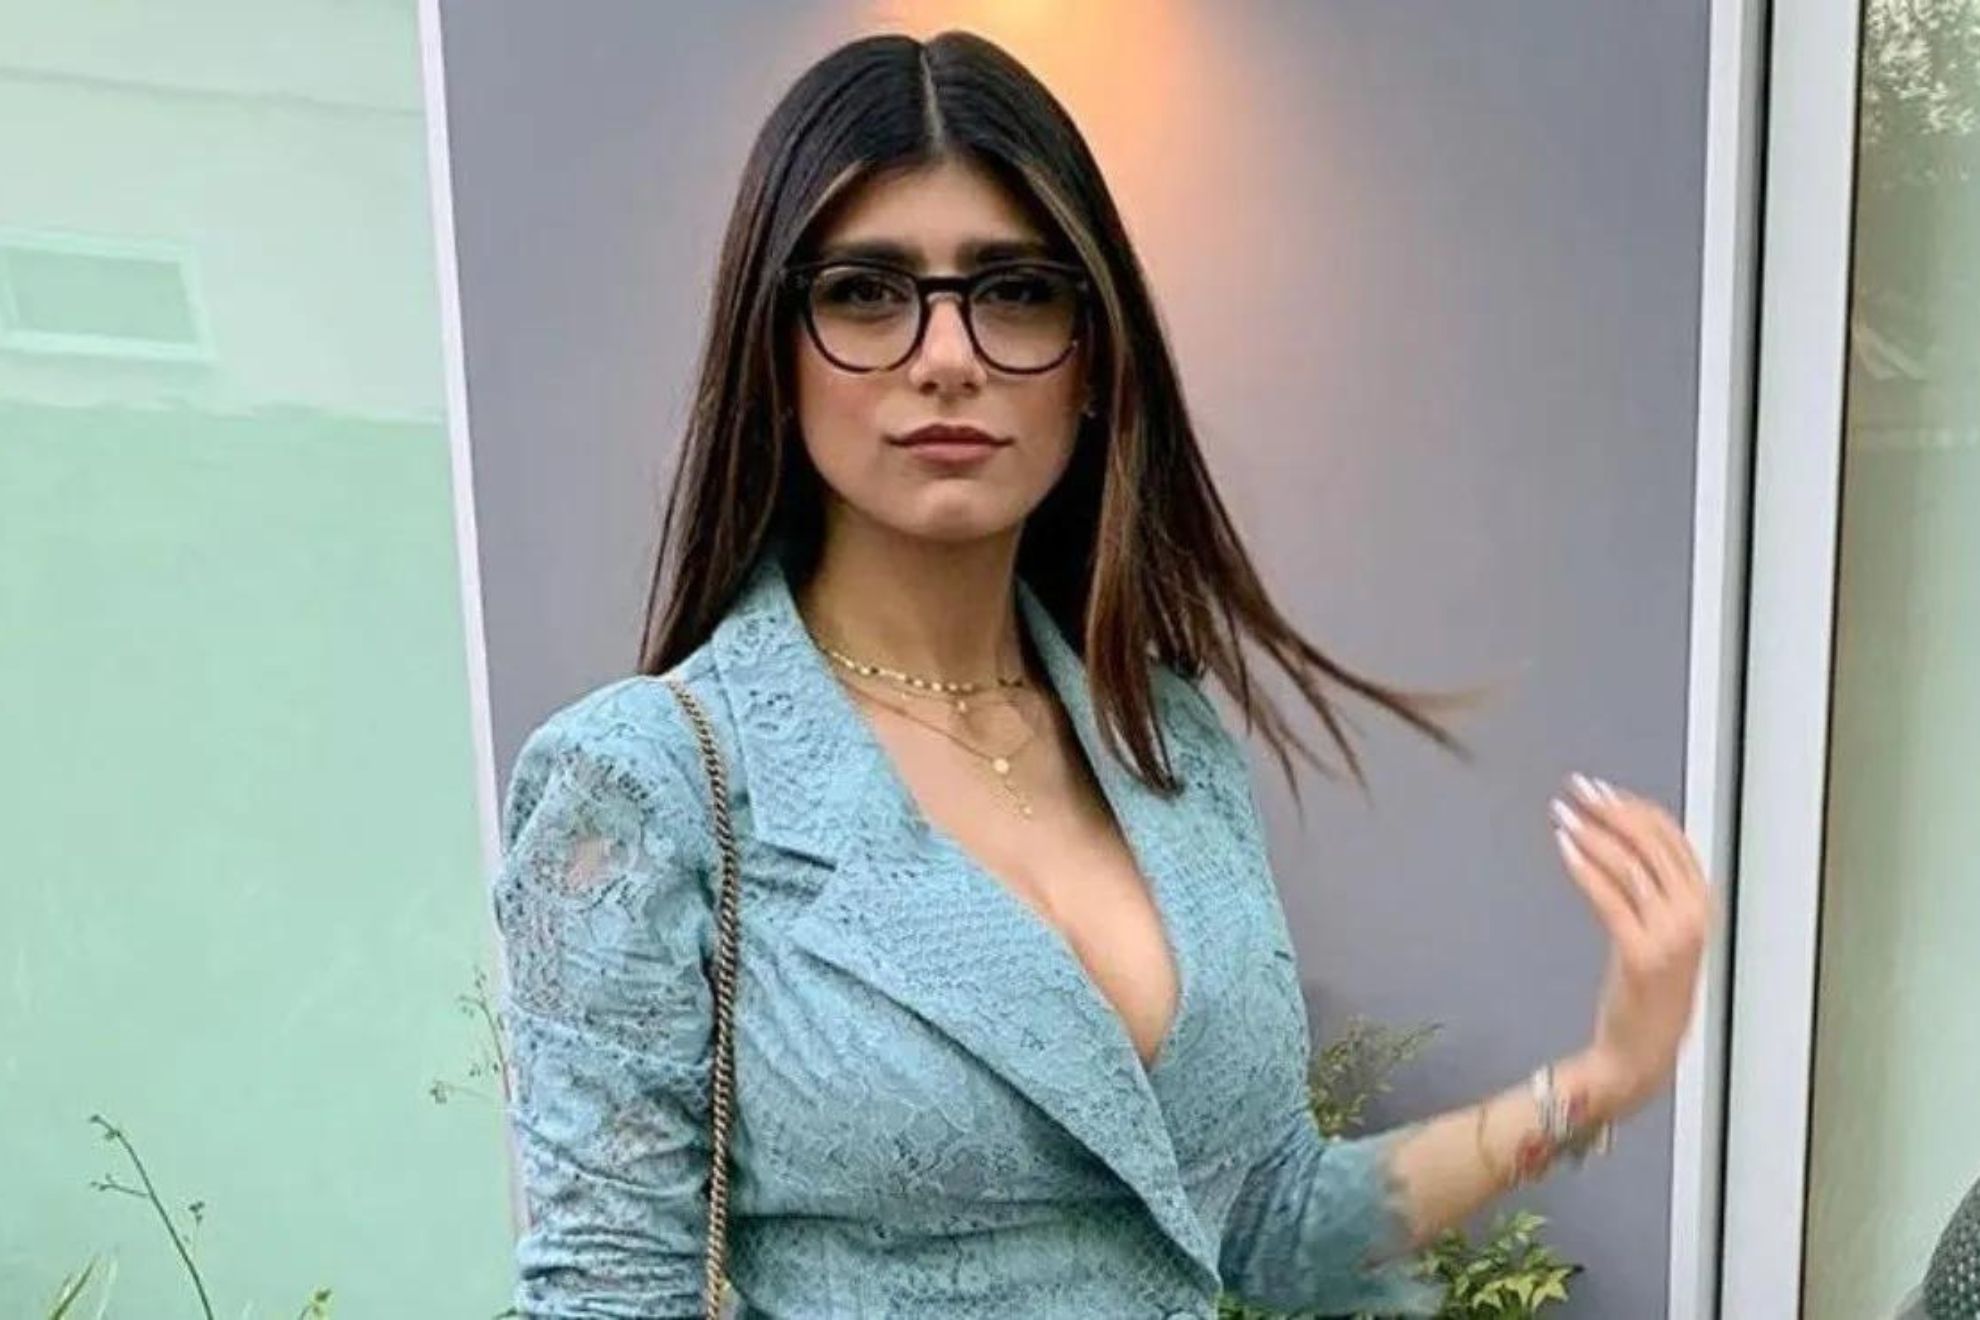 Free Mia Khalifa Sex - Playboy cancel their contract with Mia Khalifa over her support for  Palestine | Marca